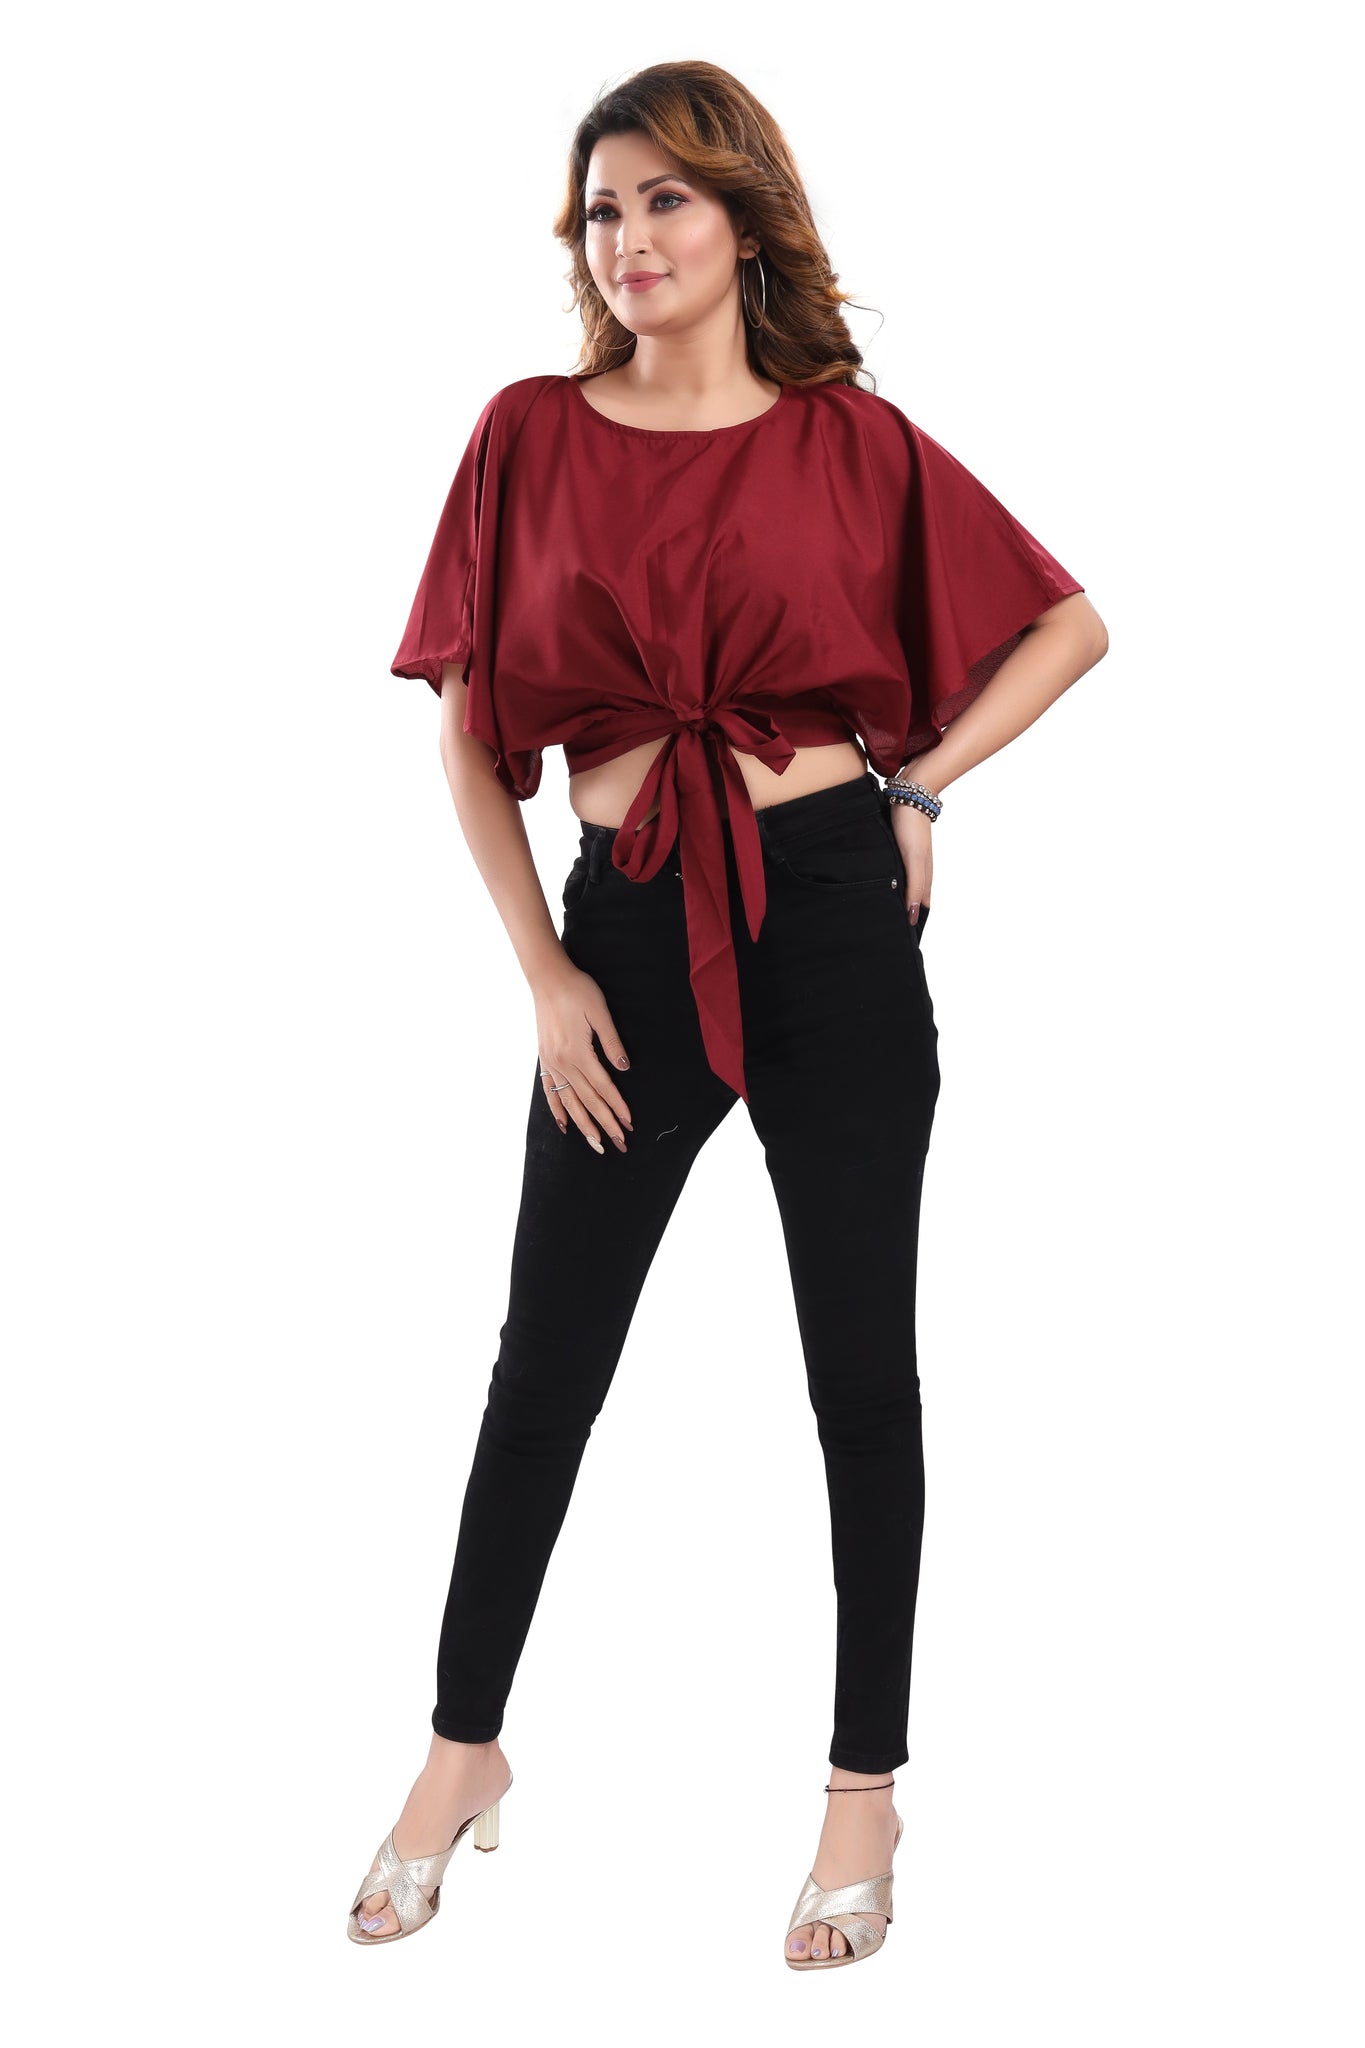 Solid Maroon Clinched Waist Top